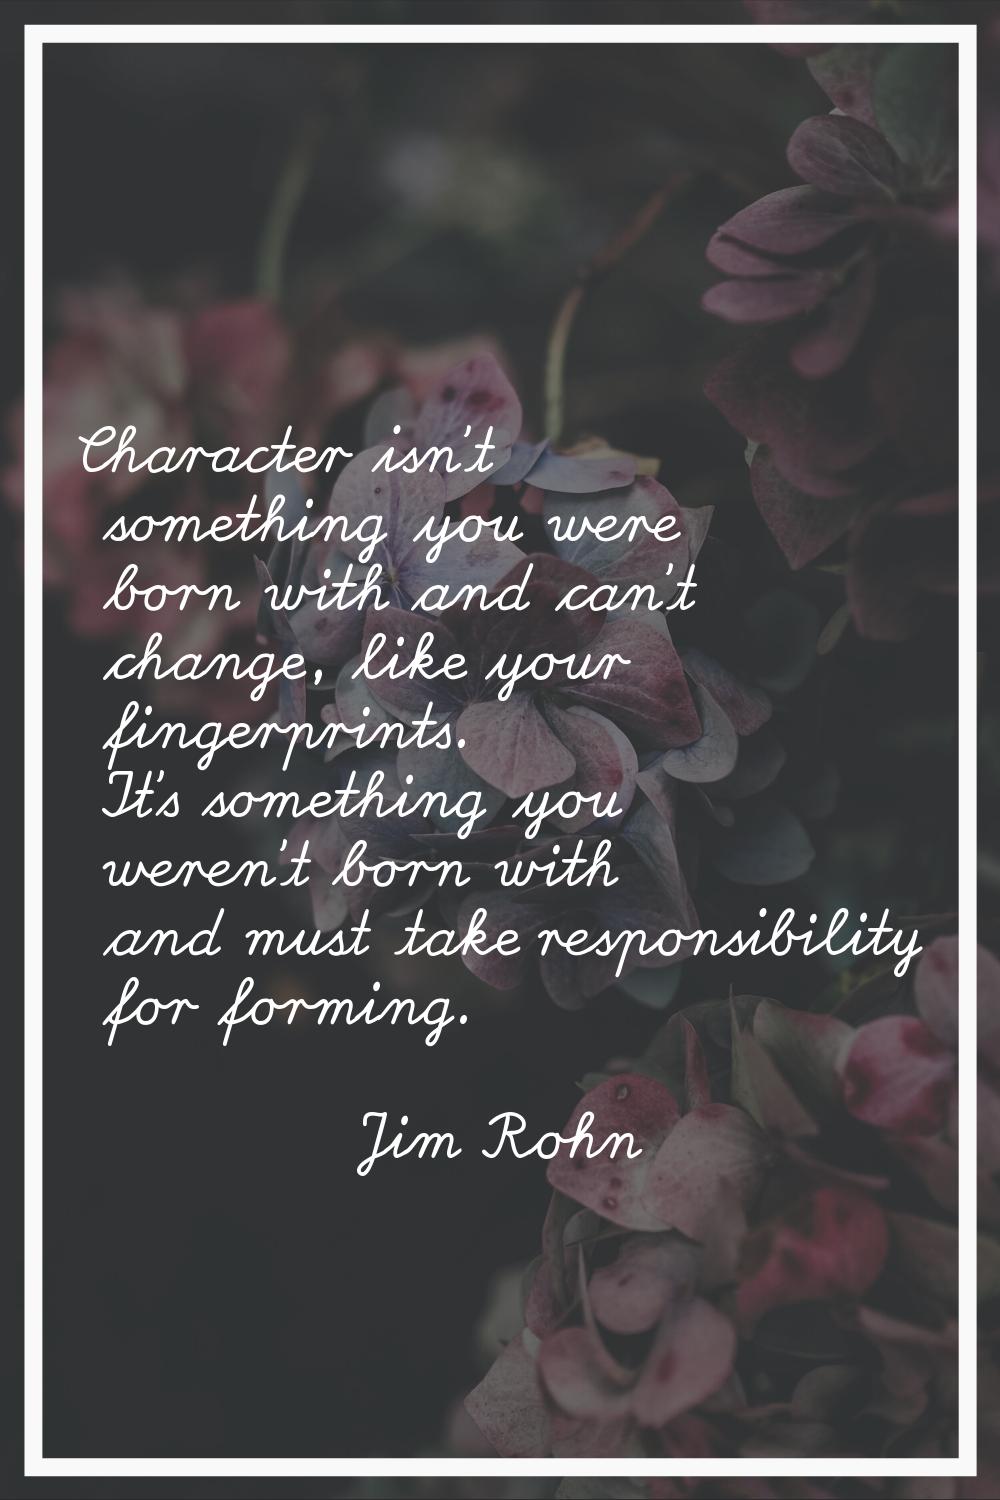 Character isn't something you were born with and can't change, like your fingerprints. It's somethi